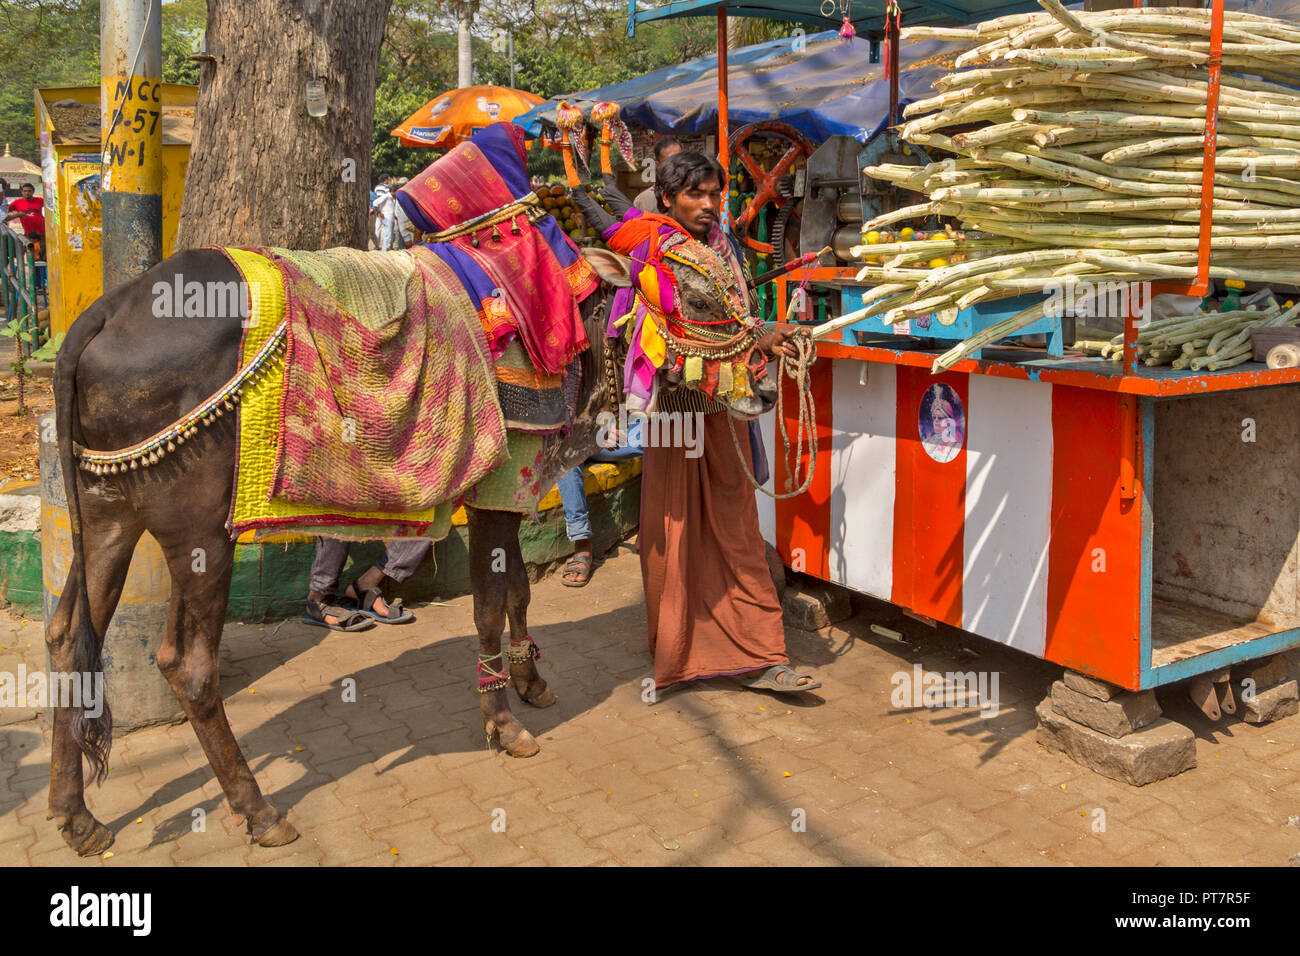 DECORATED BULL AND OWNER AT A SUGAR CANE STALL INDIA Stock Photo